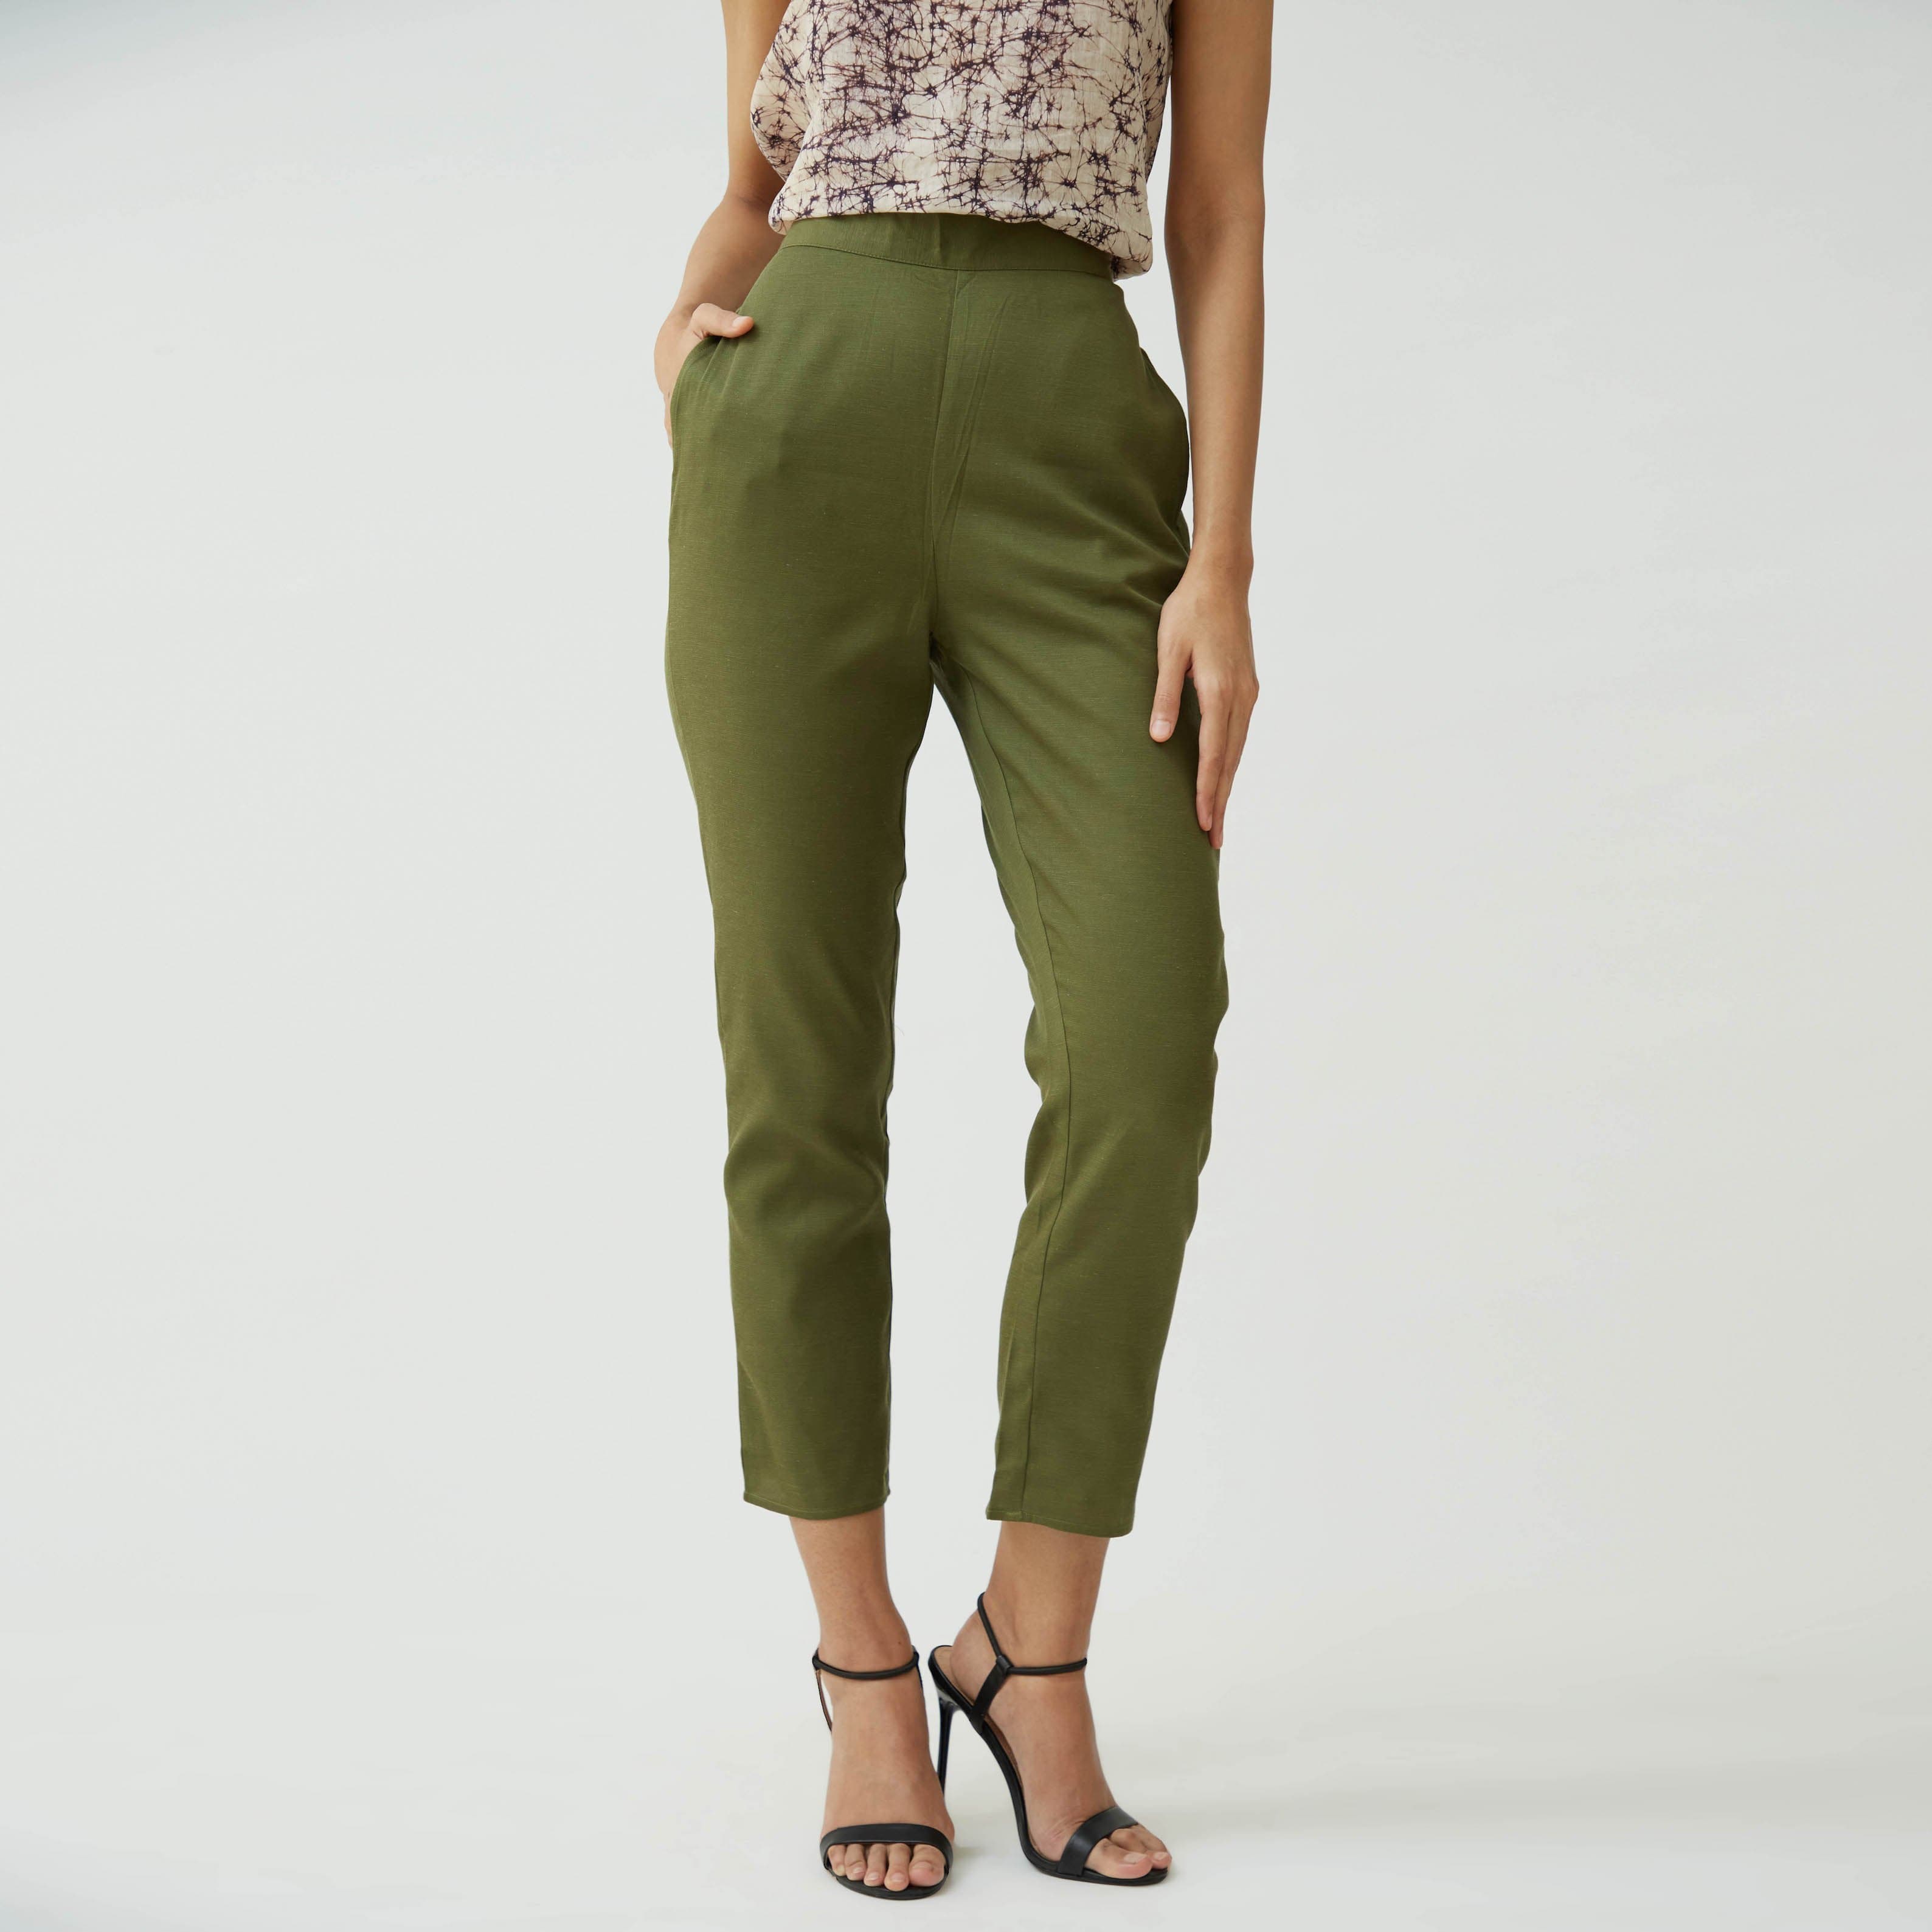 Saltpetre womens wear, indo-western pants for semi formal, casual, occassional wear. Comfortably pencil-shaped ankle-length leg pants in olive green colour. Ankle length, back elastic and side pockets.